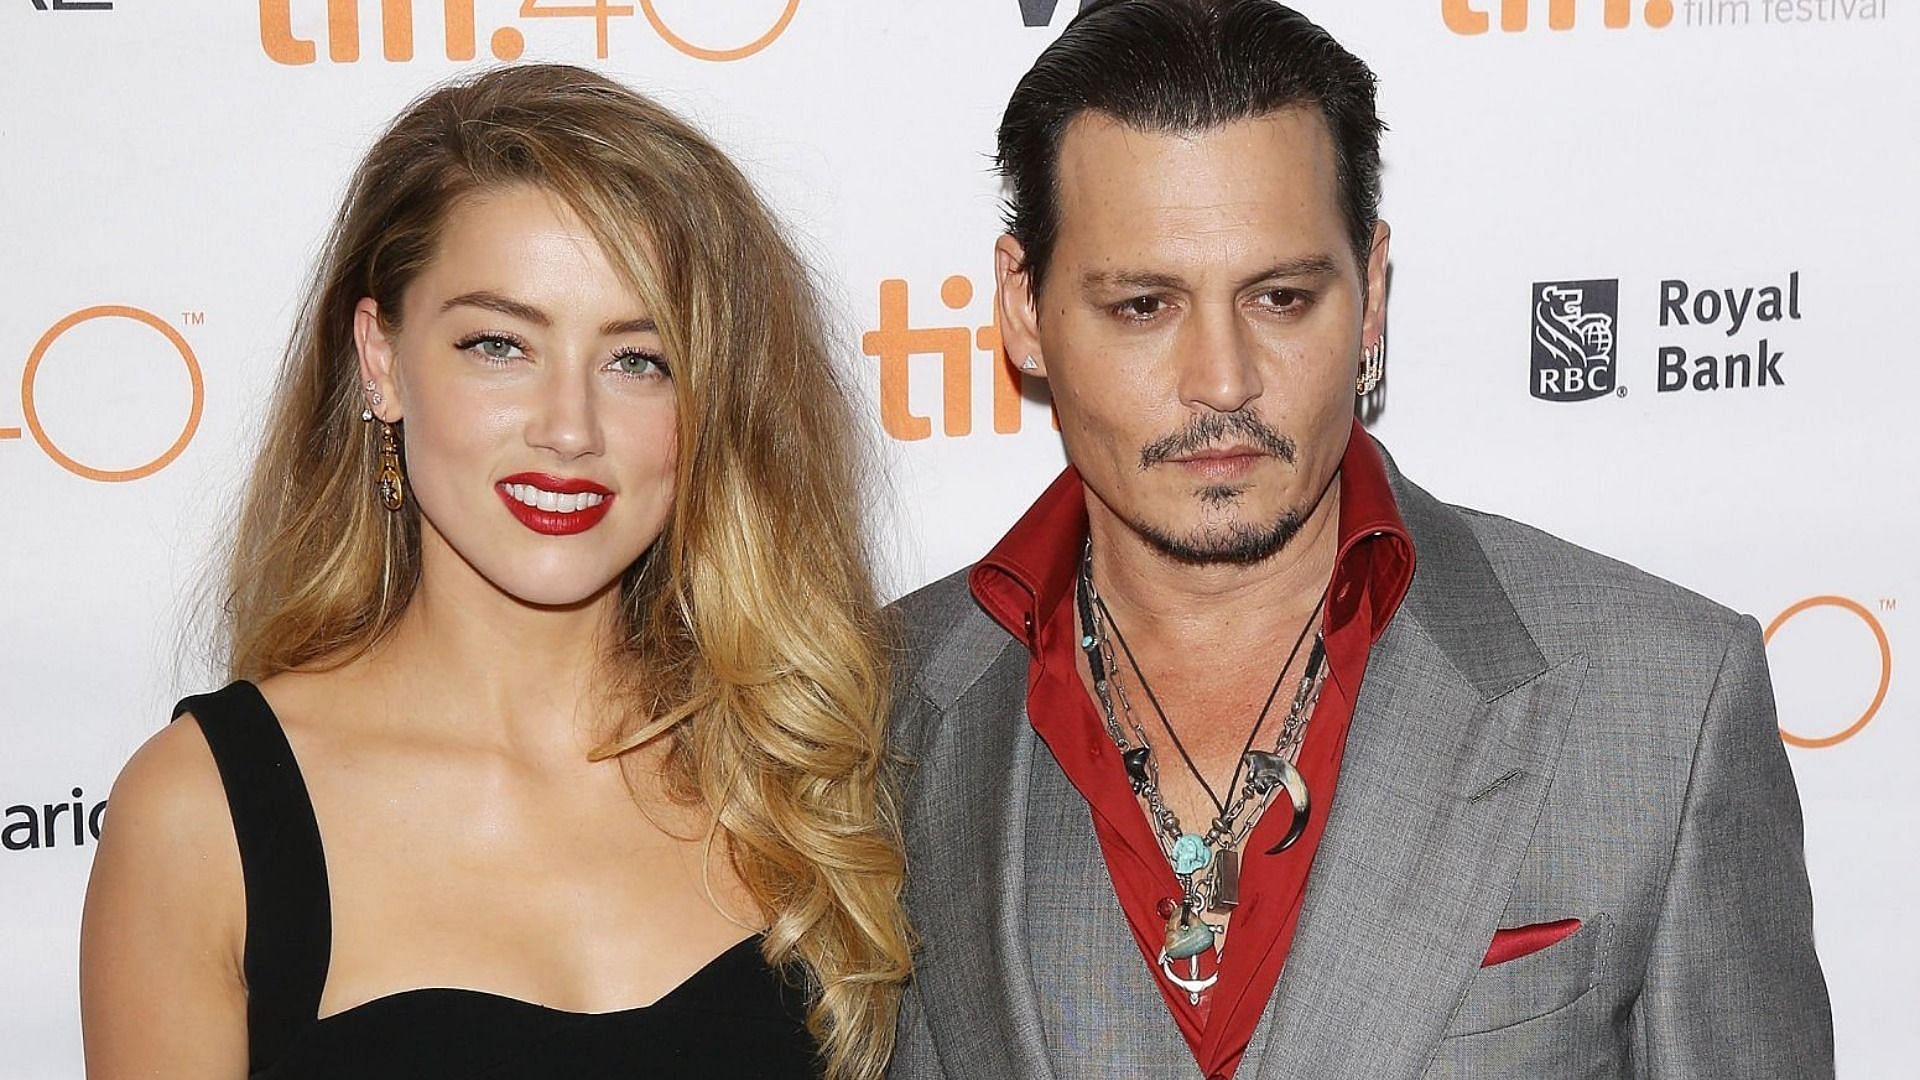 Michele Mulrooney and Eric George testified on Depp and Heard&rsquo;s post-nuptial agreement and the Washington Post op-ed, respectively (Image via Getty Images)